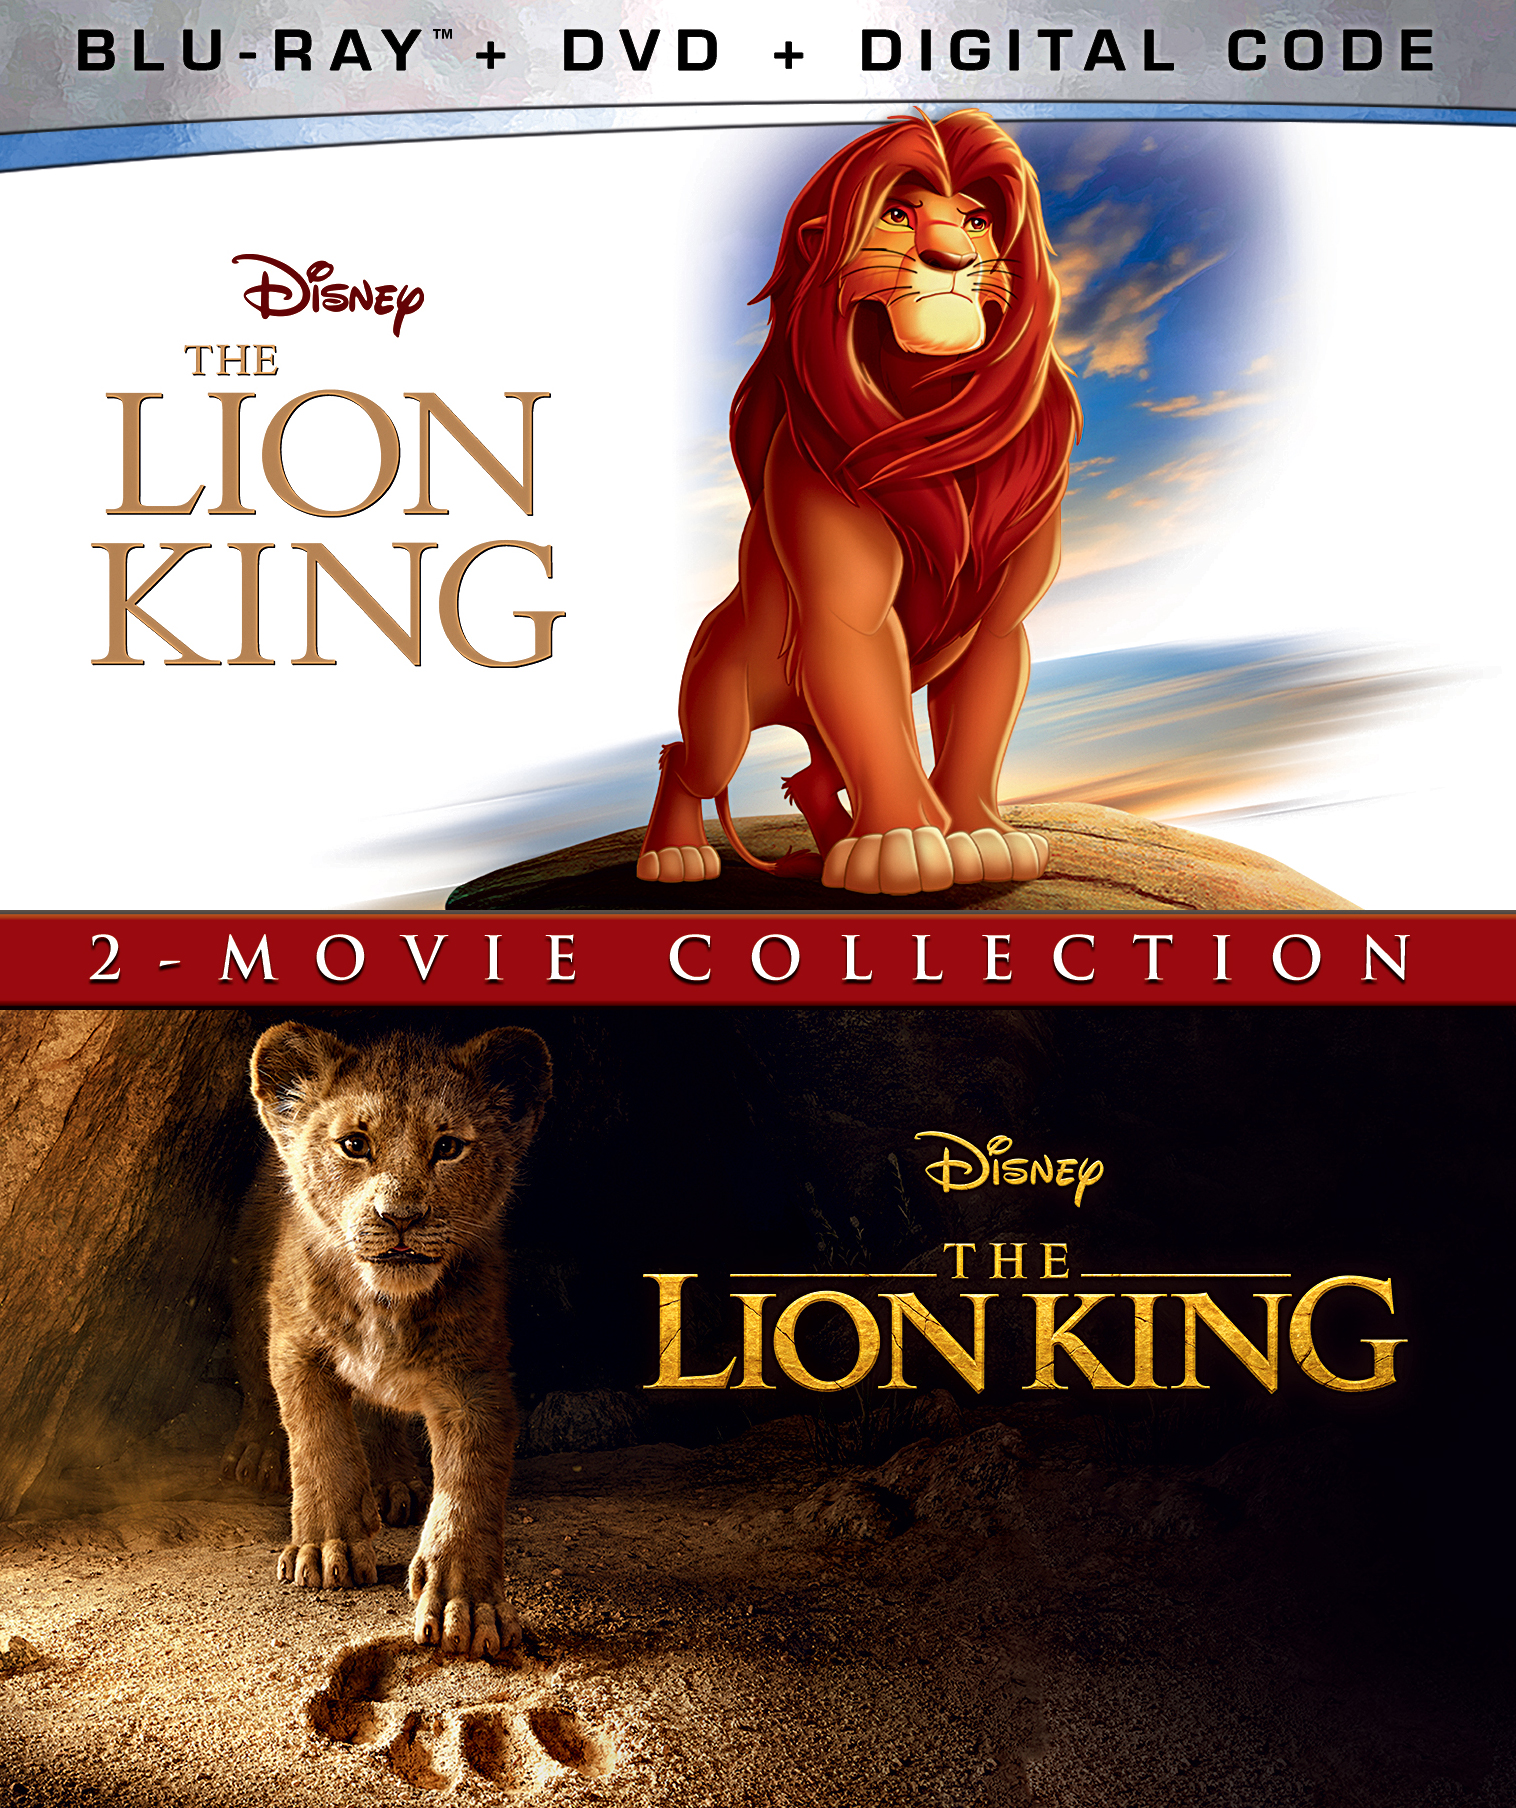 Bandiet Ideaal Syndicaat The Lion King 2-Movie Collection [Includes Digital Copy] [Blu-ray/DVD] -  Best Buy